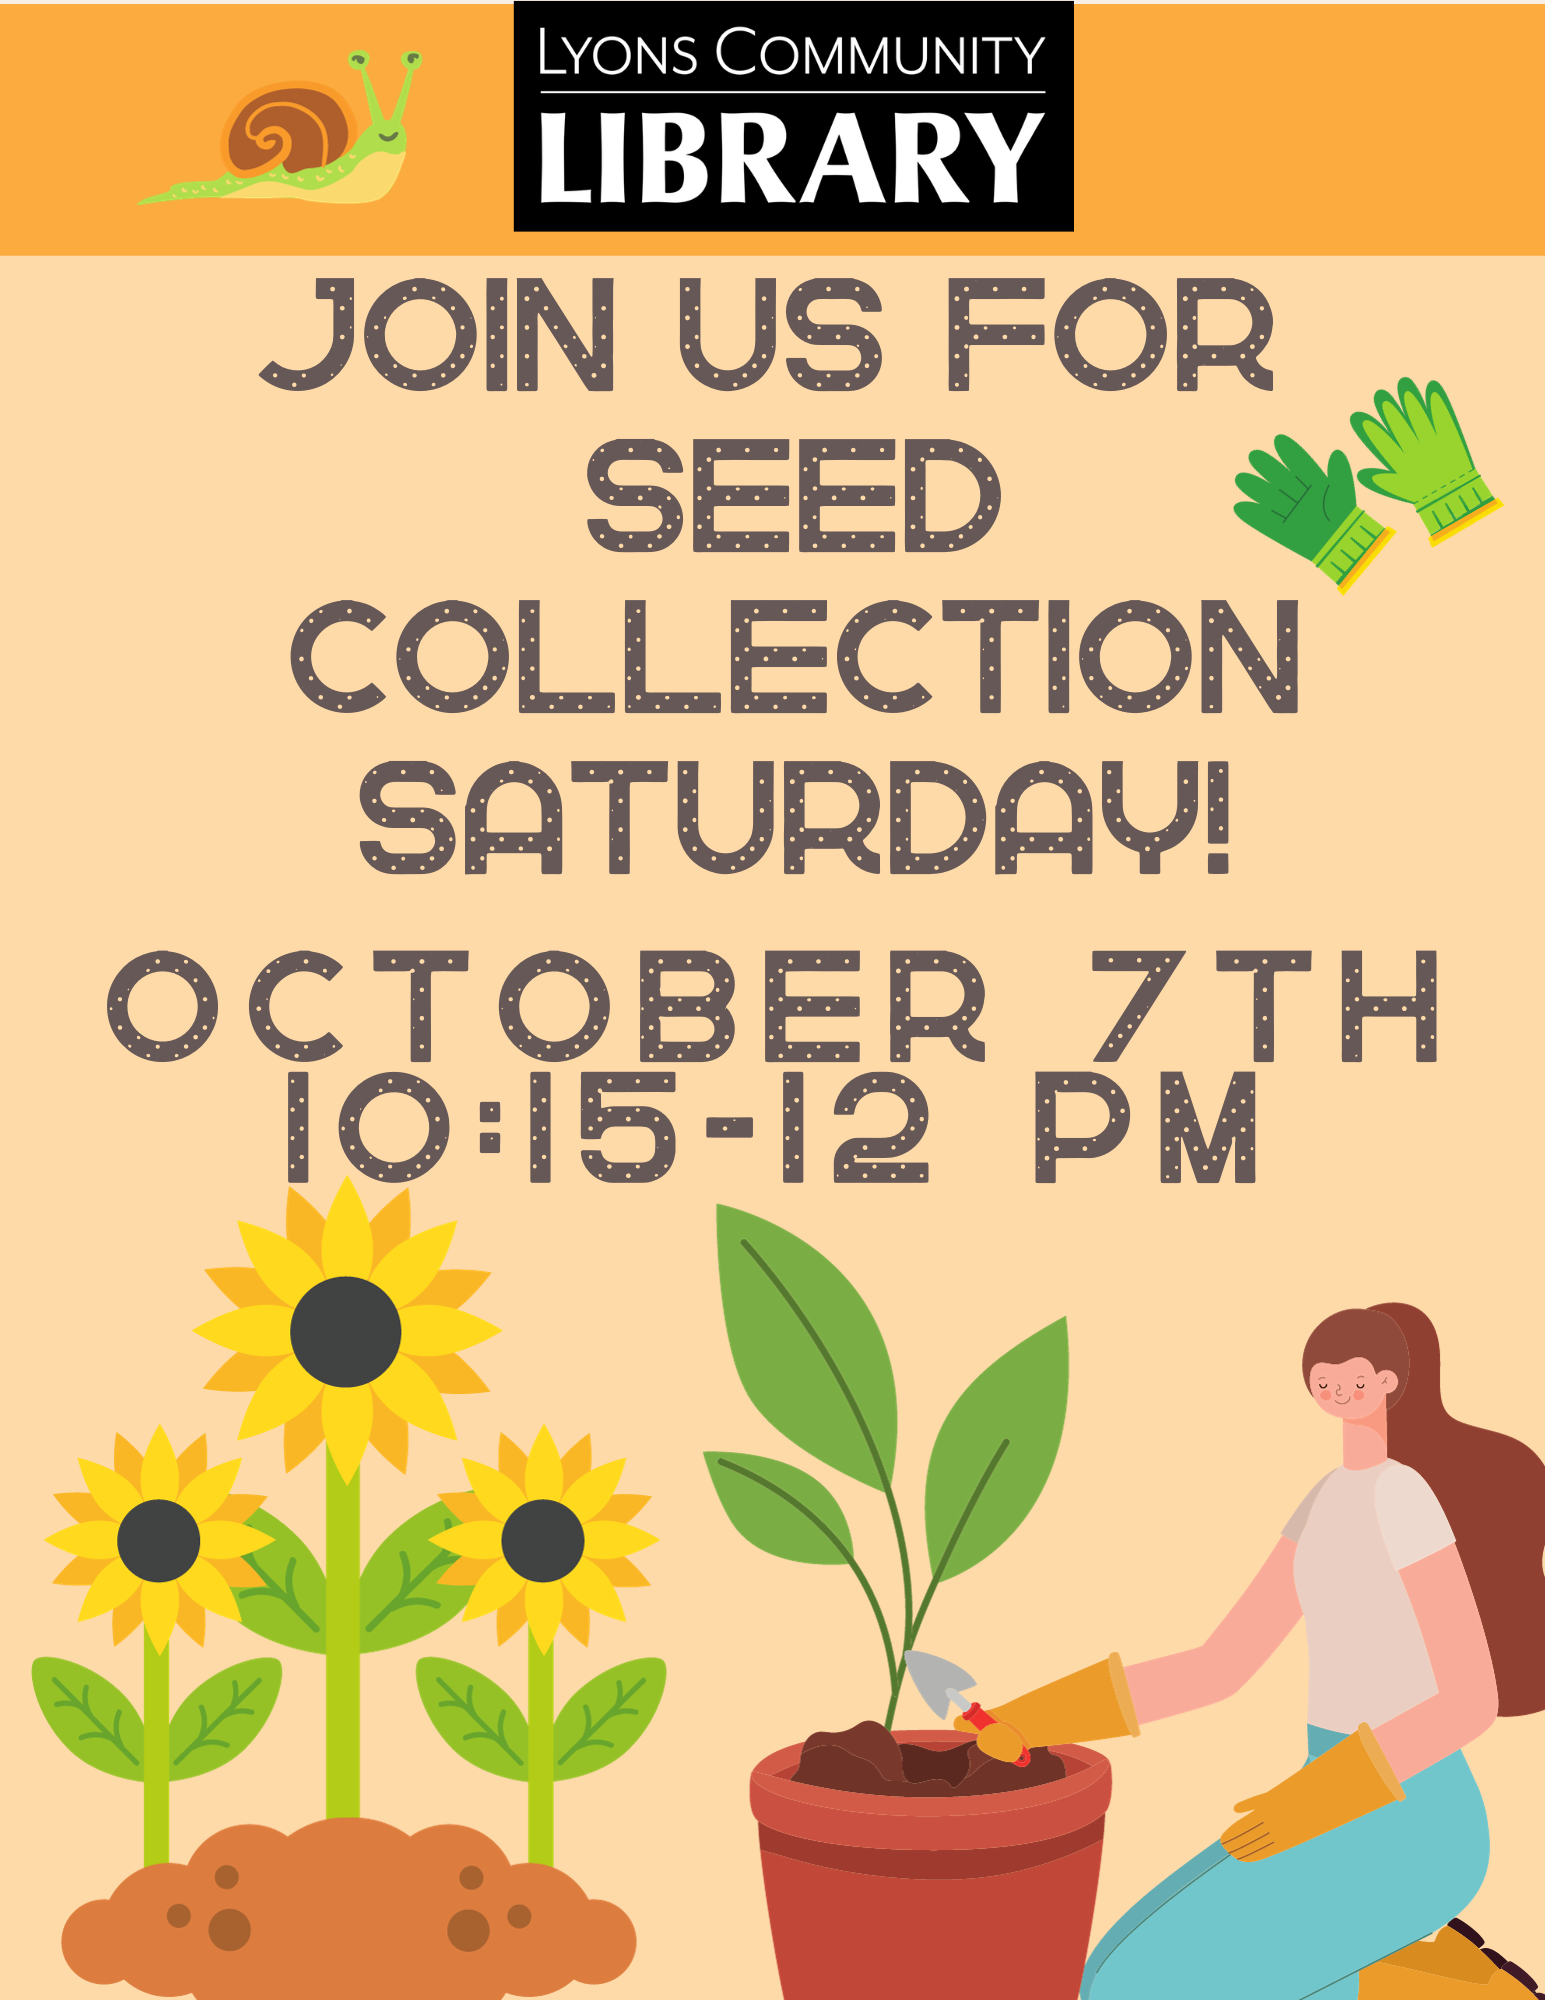 Event flyer with plants and garden theme